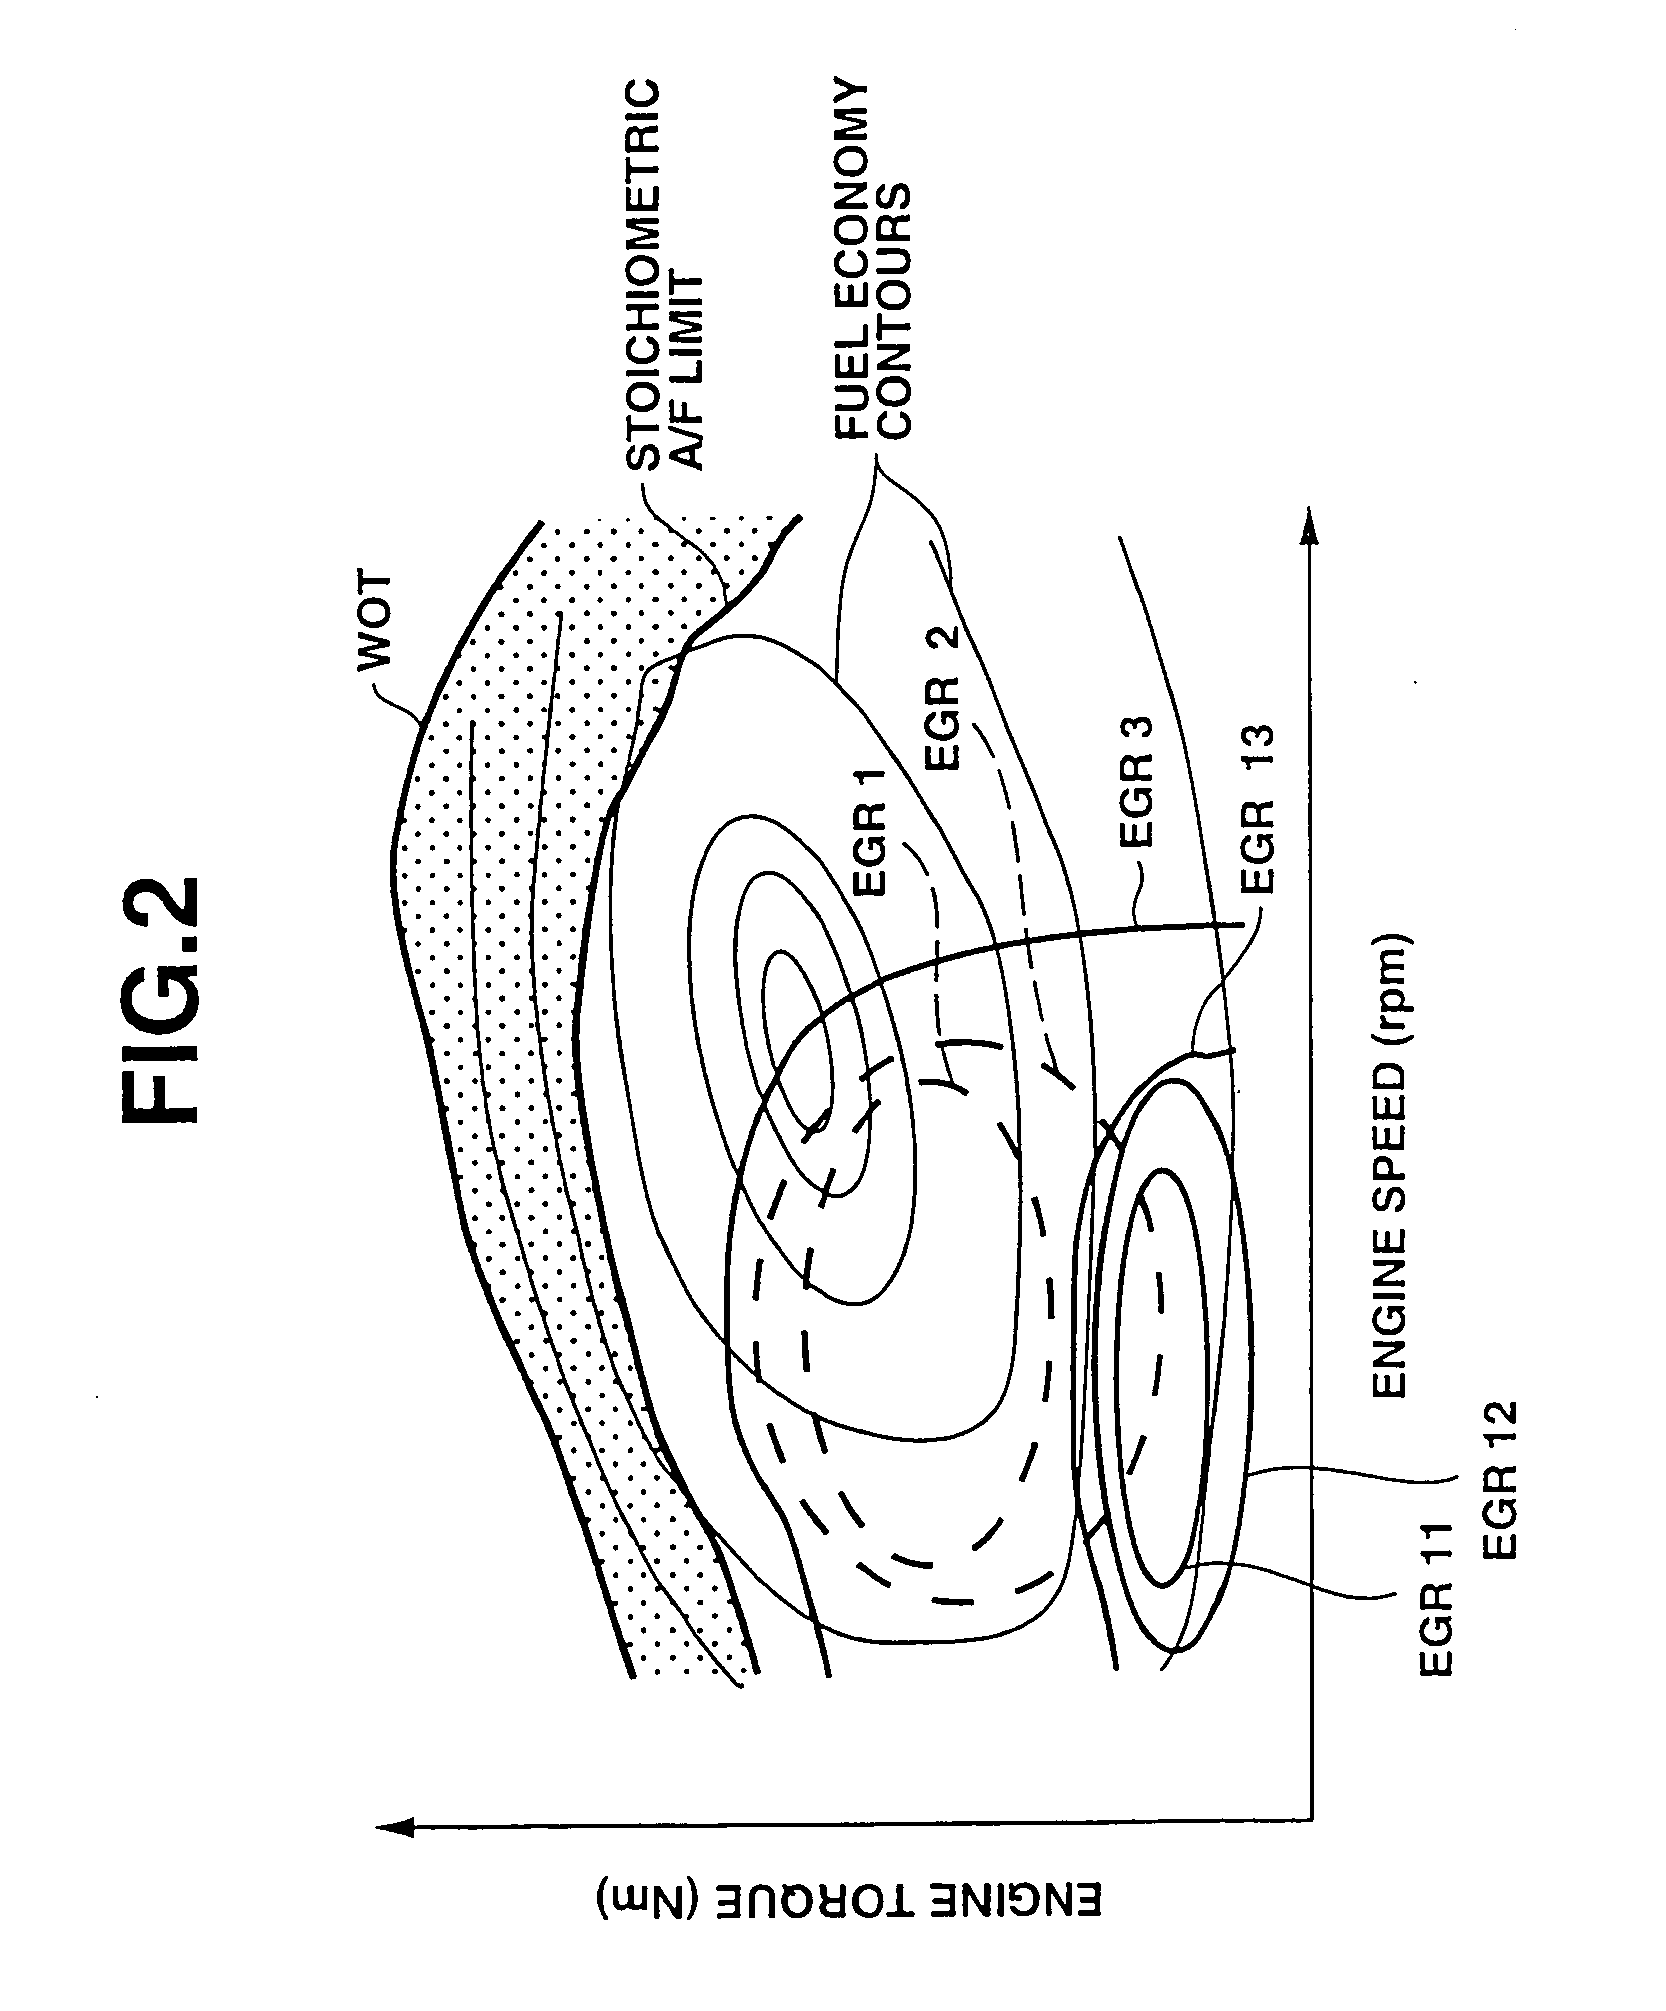 Control apparatus and process for internal combustion engine